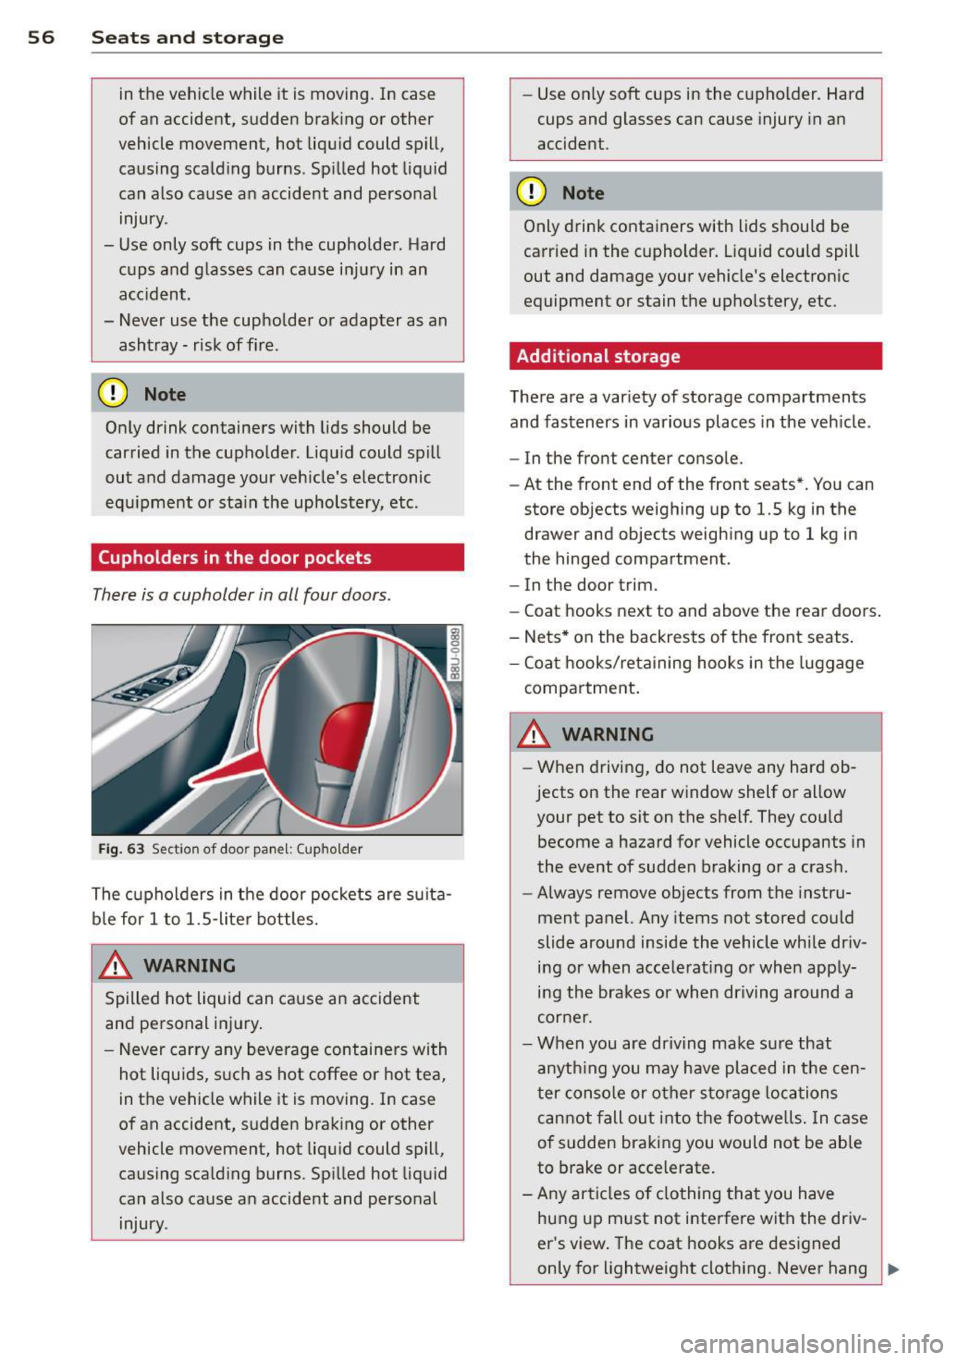 AUDI Q3 2015  Owners Manual 56  Seats  and storage 
in the  vehicle  while it is moving.  In  case 
of  an accident,  sudden  braking  or  other 
vehicle  movement,  hot  liquid  could  spill, 
causing  scalding  burns . Spilled